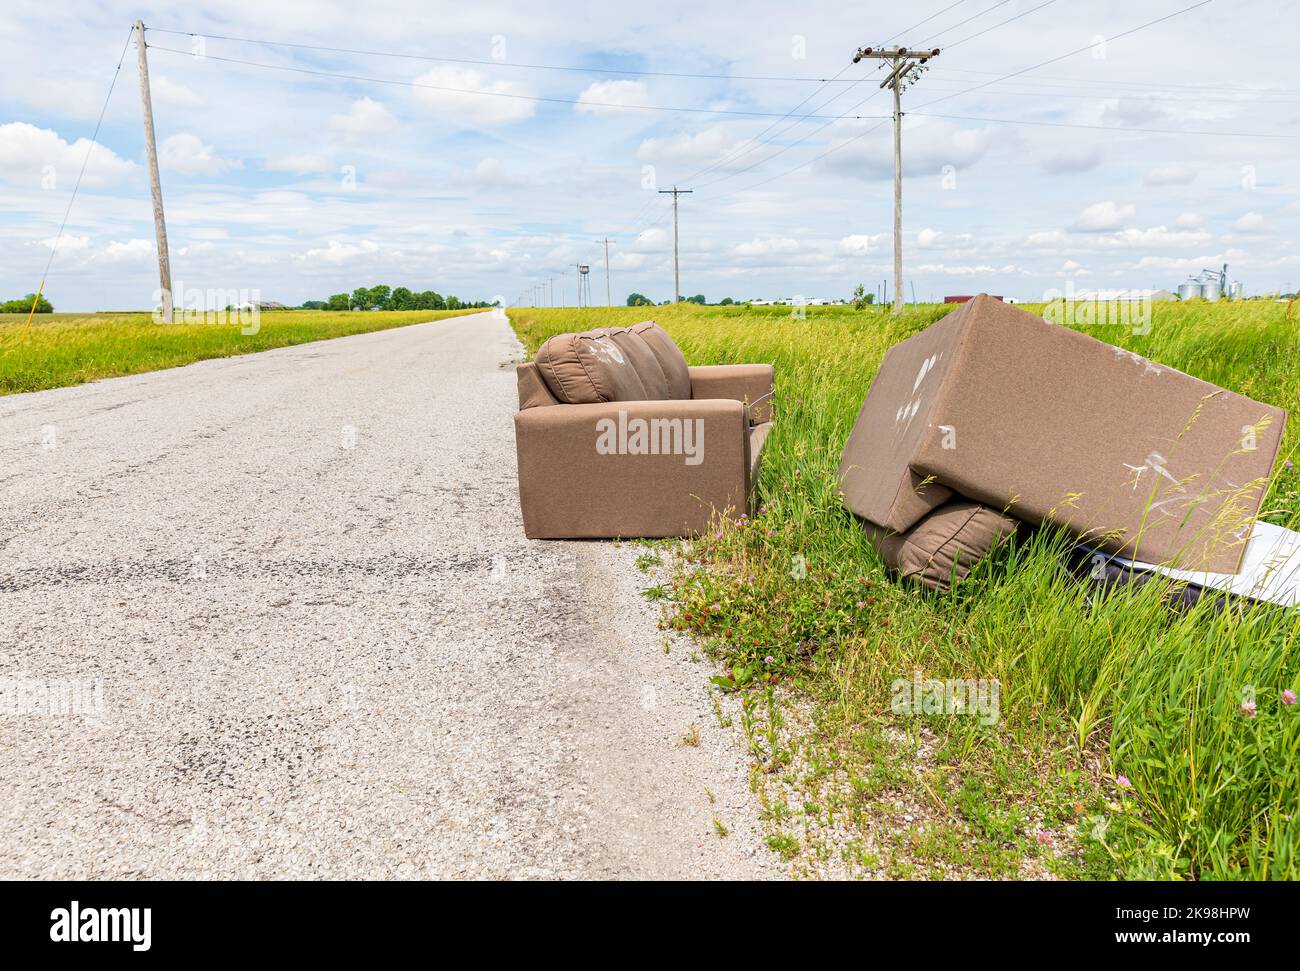 Furniture dumped in ditch of road. Fly dumping, pollution and littering concept Stock Photo